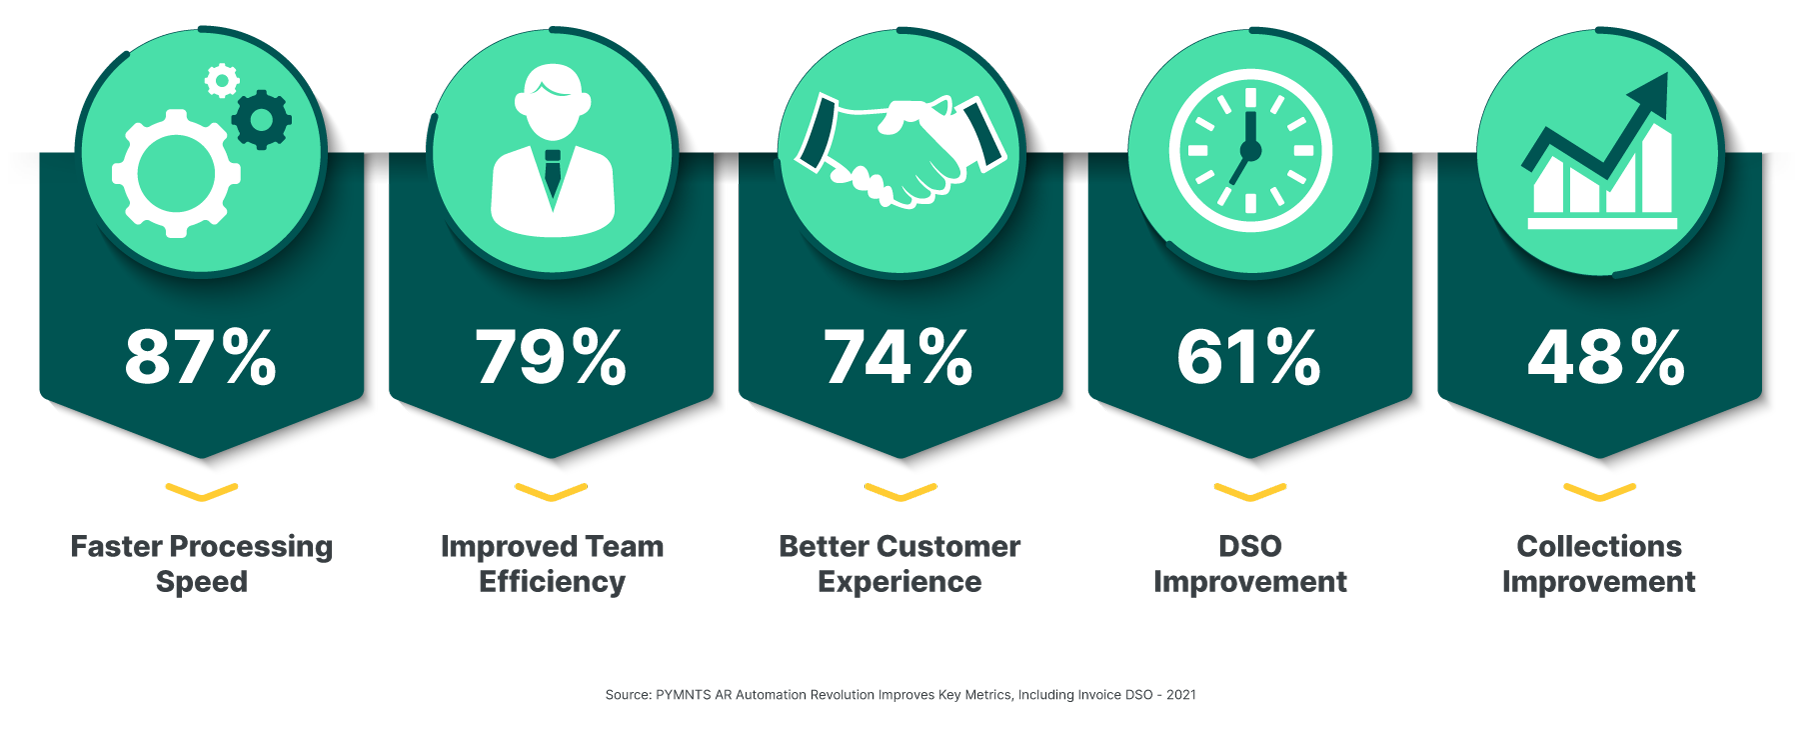 Infographic: faster processing speed, improved team efficiency, better customer service, DSO improvement, collections improvement